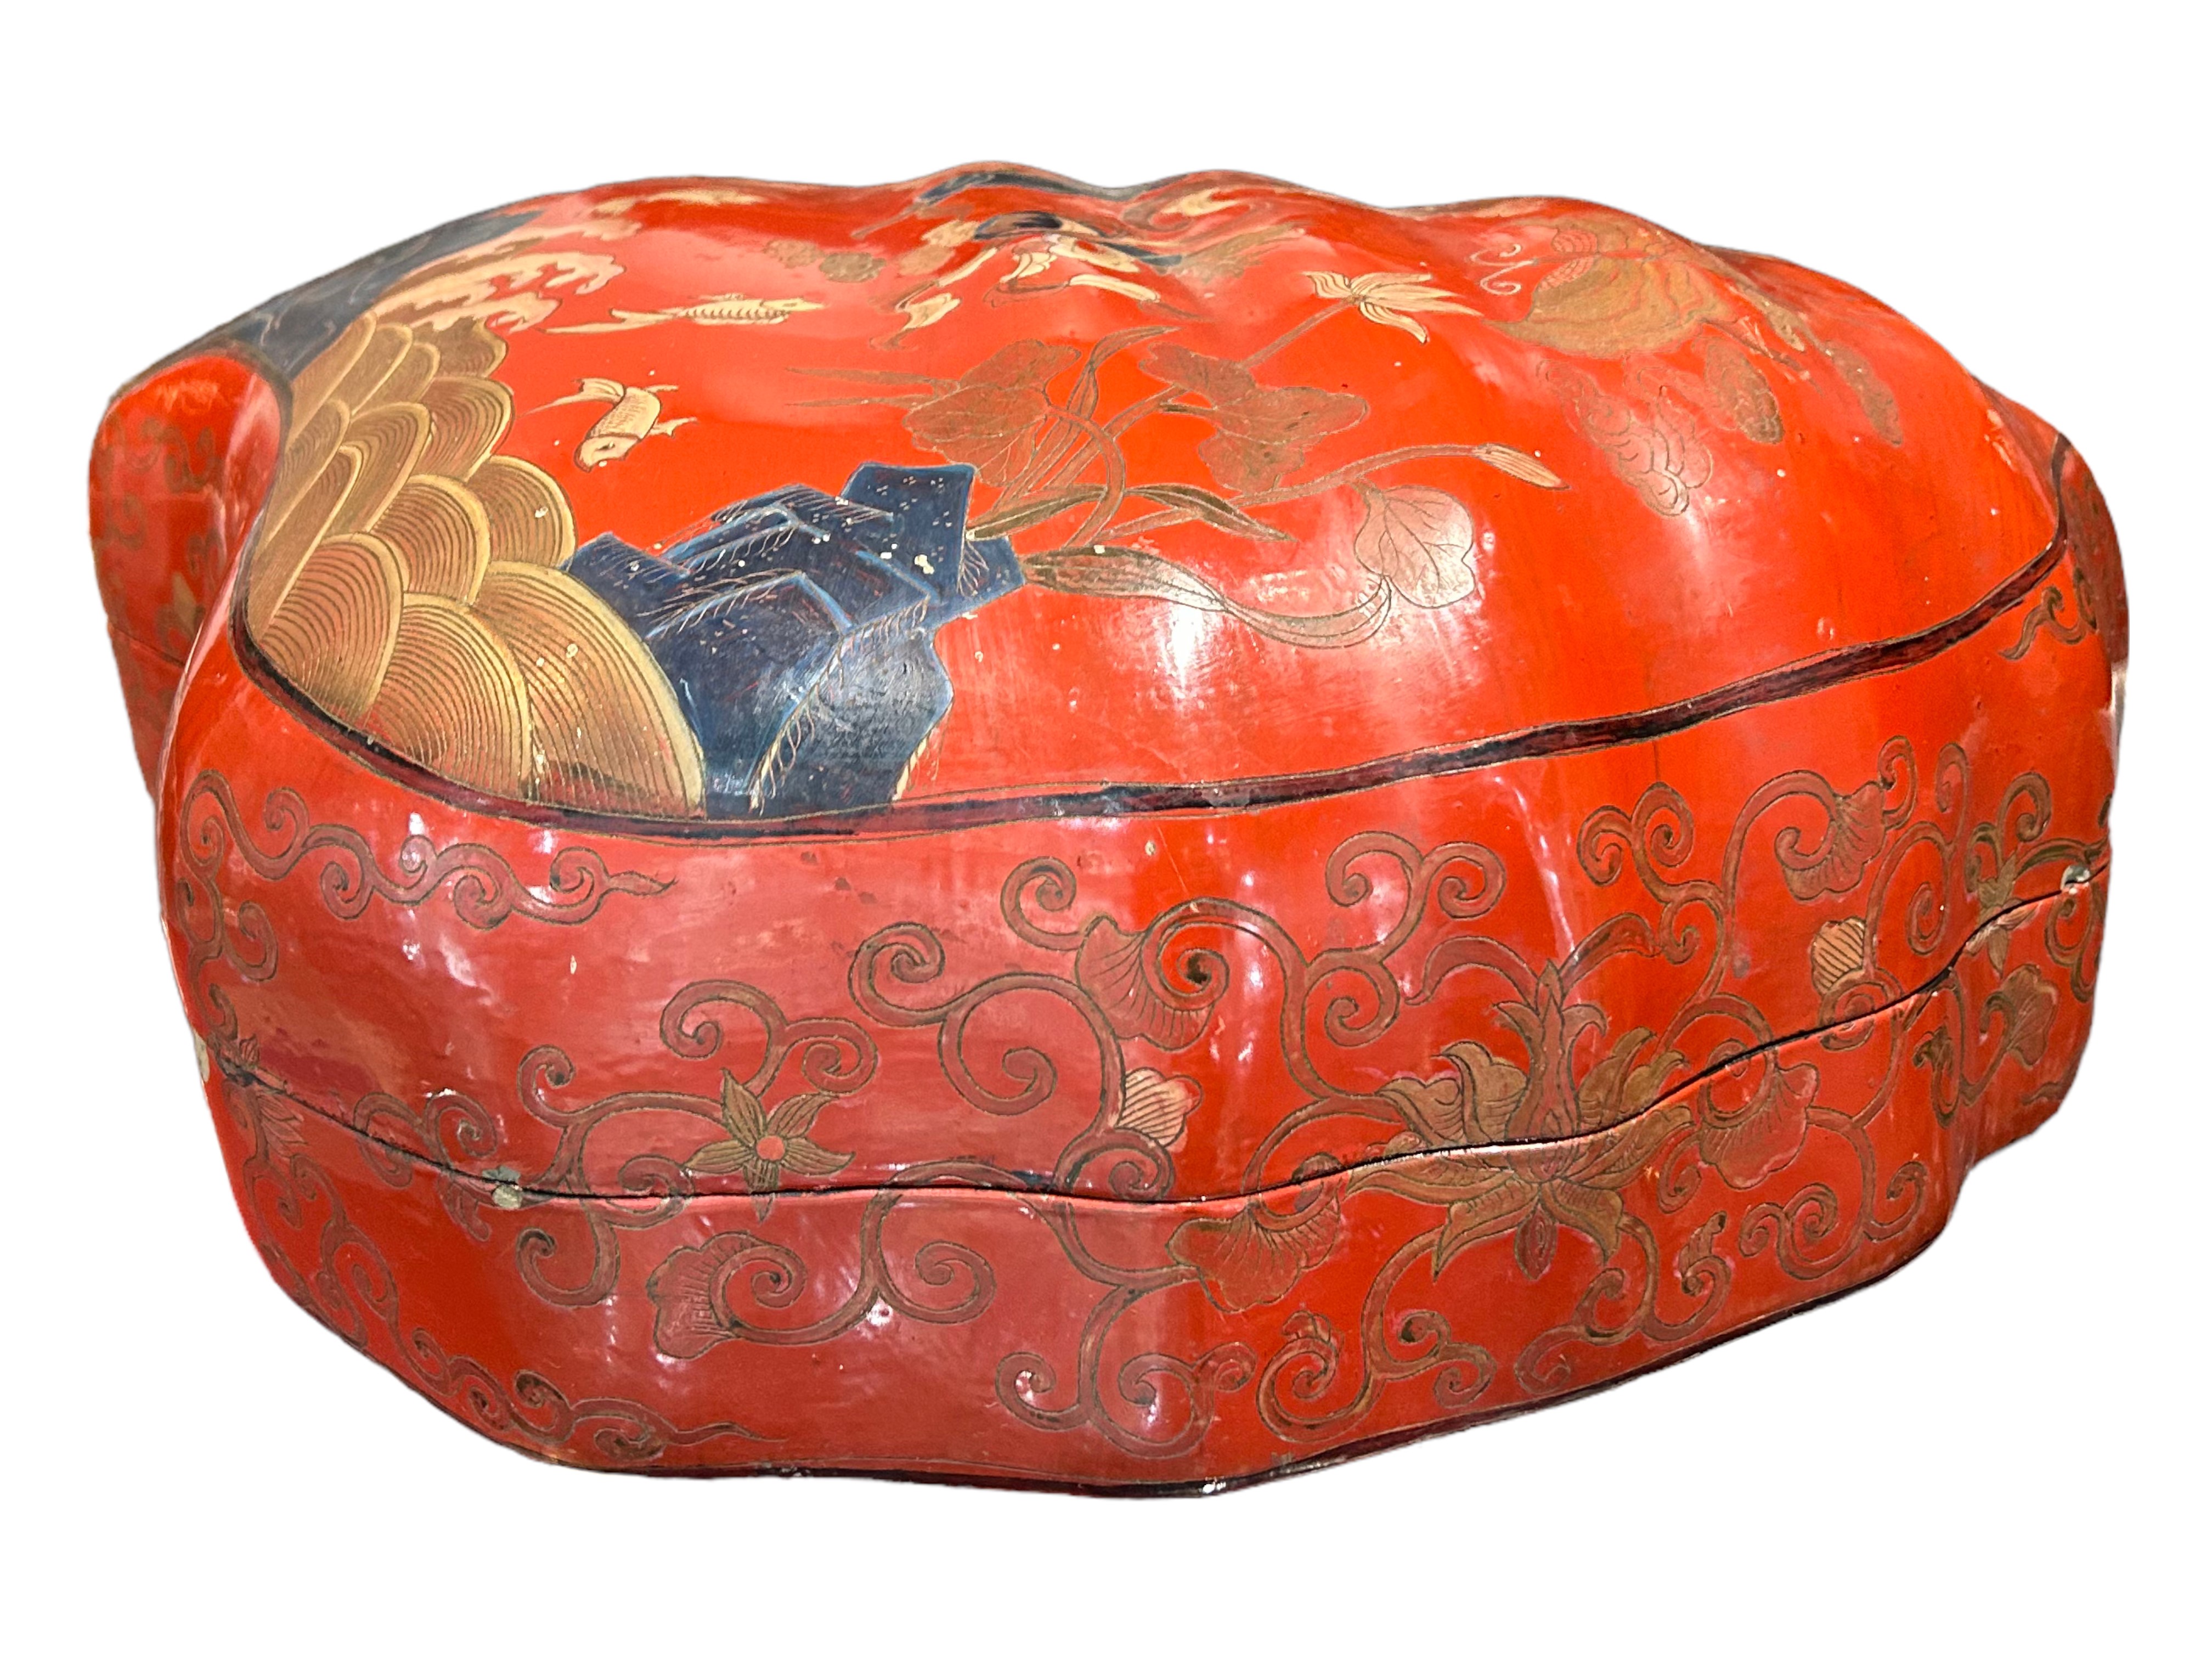 A LARGE LATE 19TH/EARLY 20TH CENTURY JAPANESE LACQUERED SHELL FORM BOX Hand painted with a rocky - Image 2 of 3